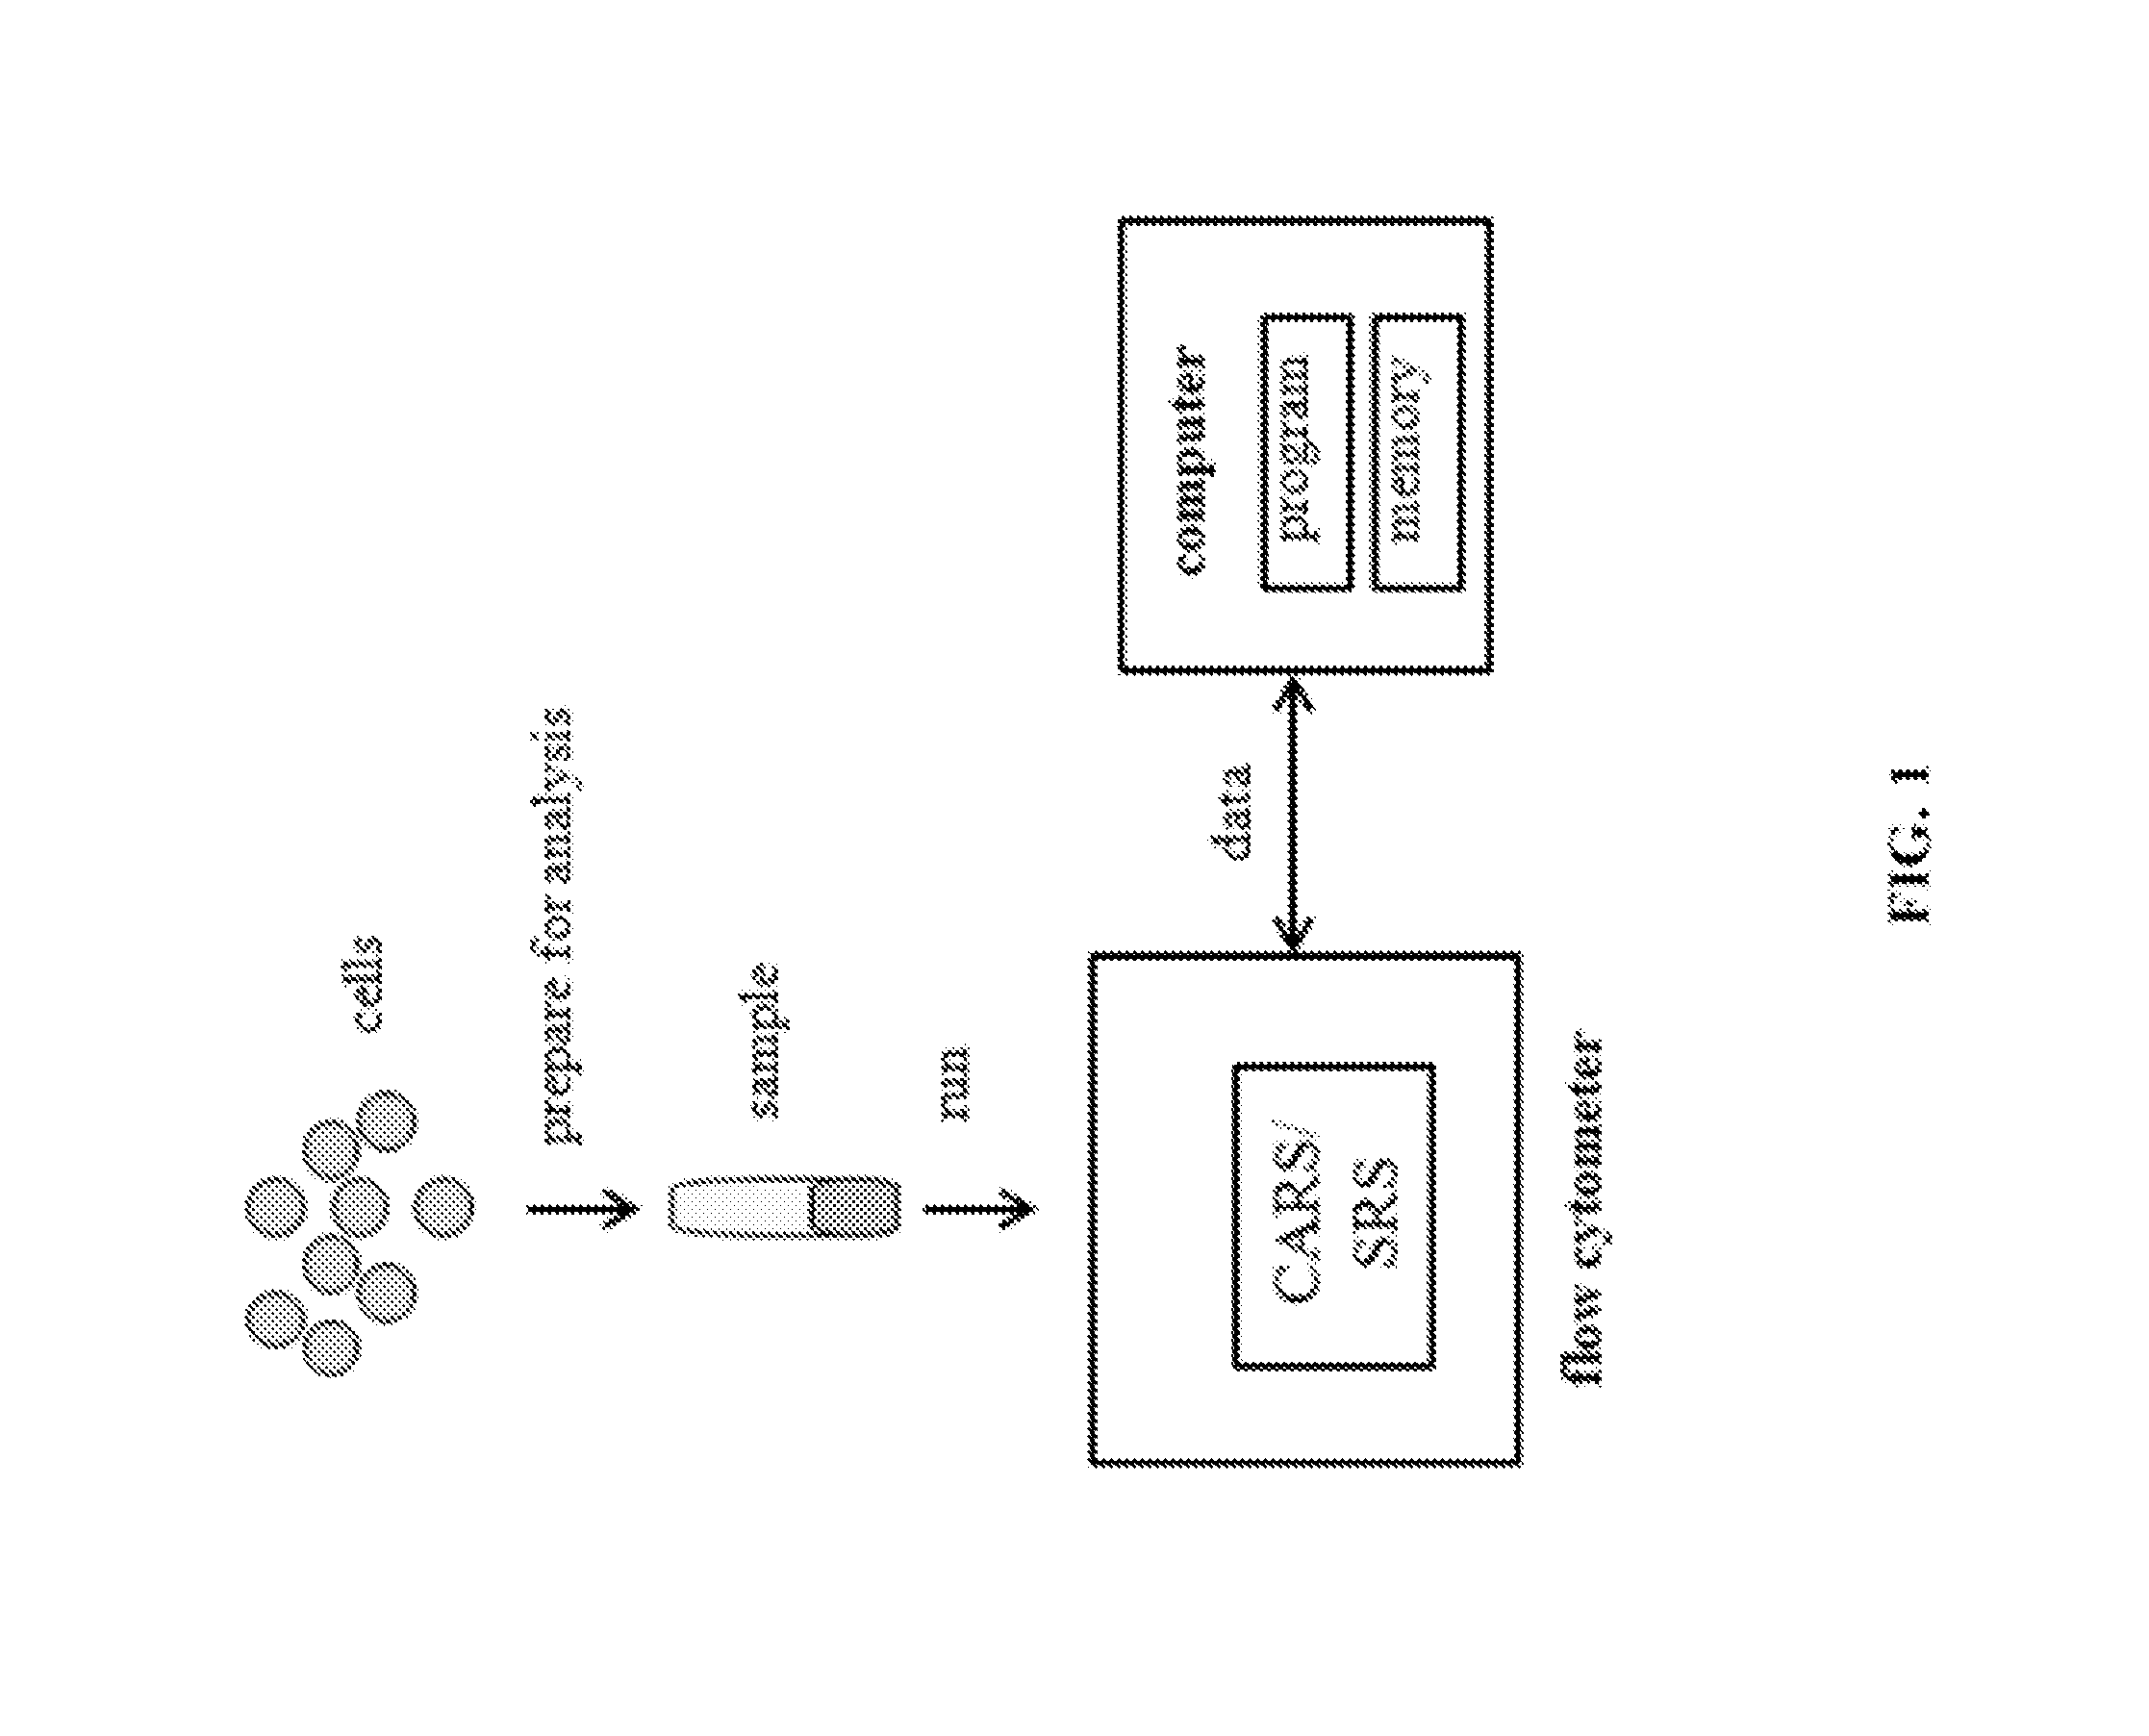 Methods and systems for coherent raman scattering